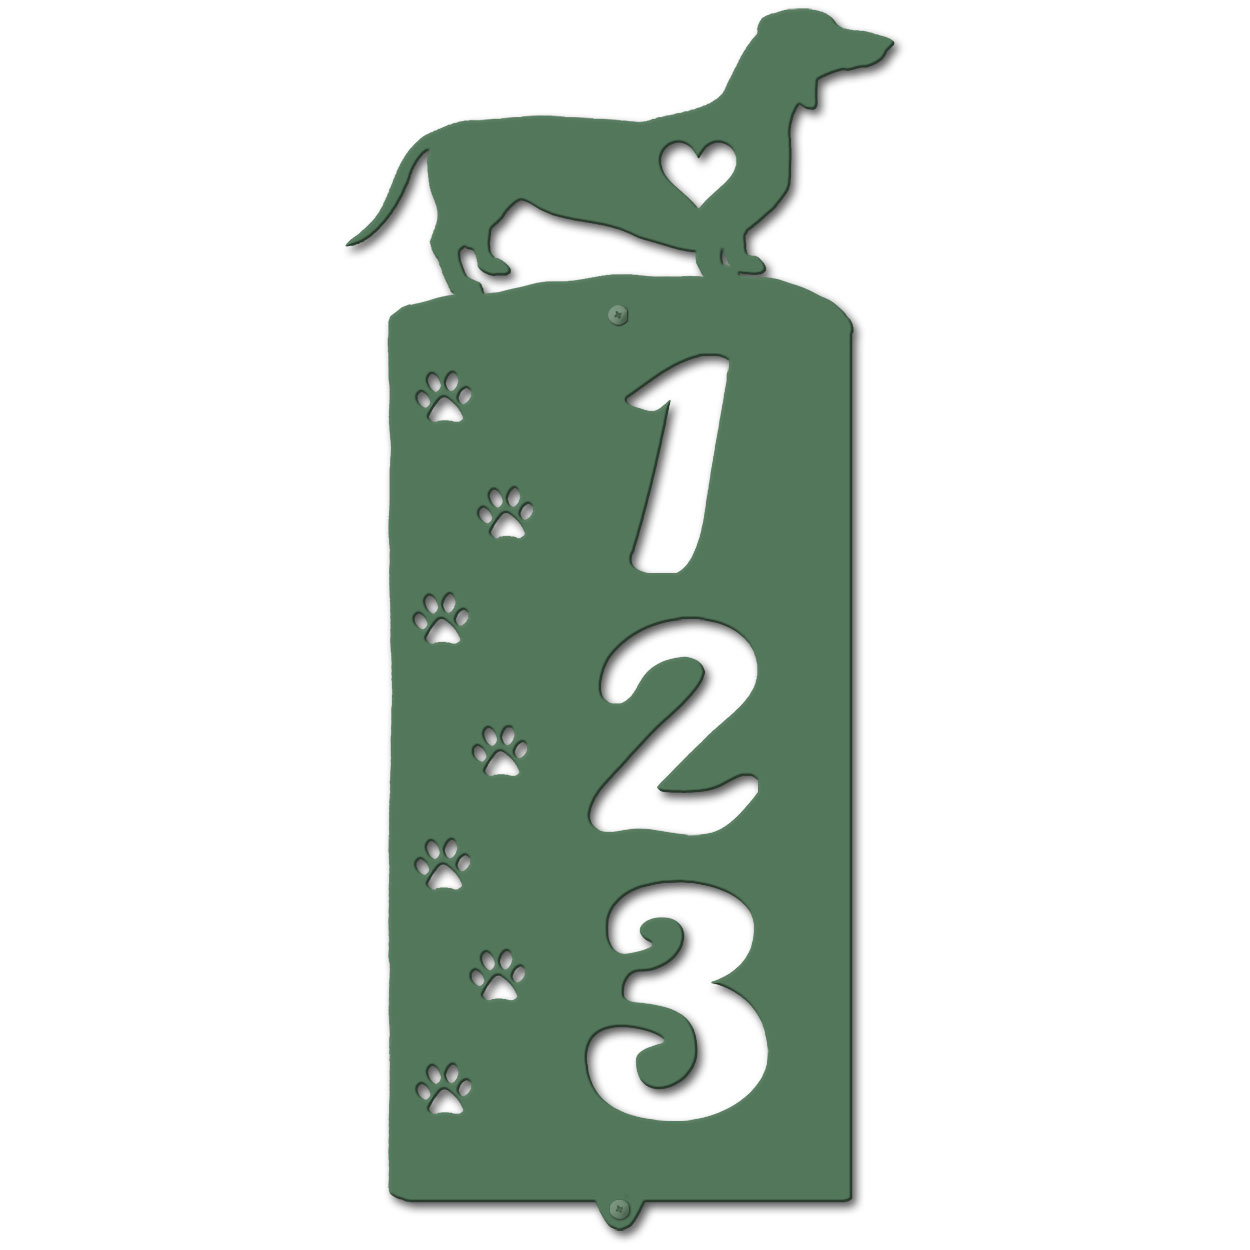 636183 - Dachshund Cut Outs Three Digit Address Number Plaque